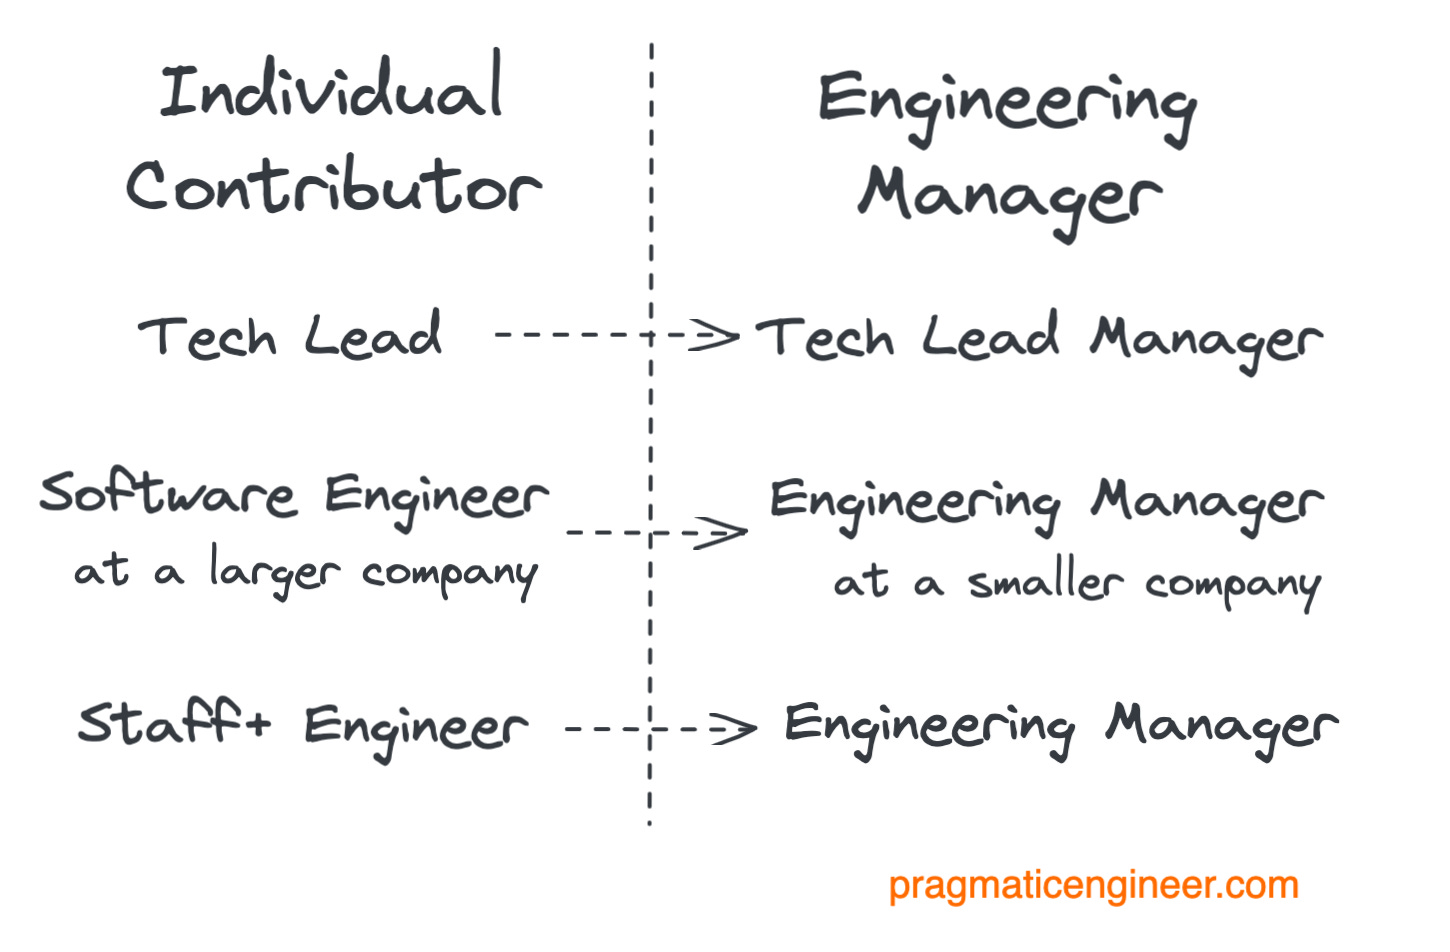 A few of the typical transition paths from individual contributor to engineer manager